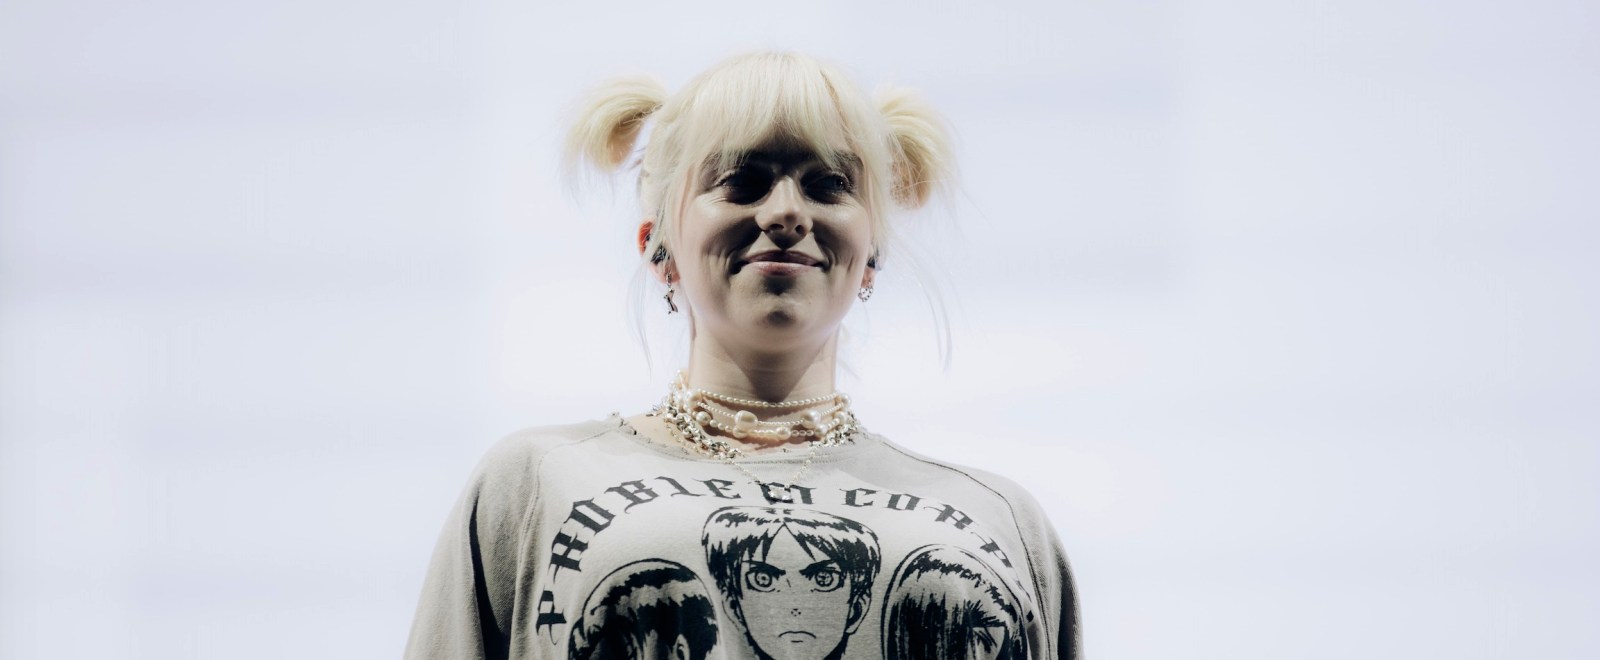 Billie Eilish's hair color evolution: From green to blond